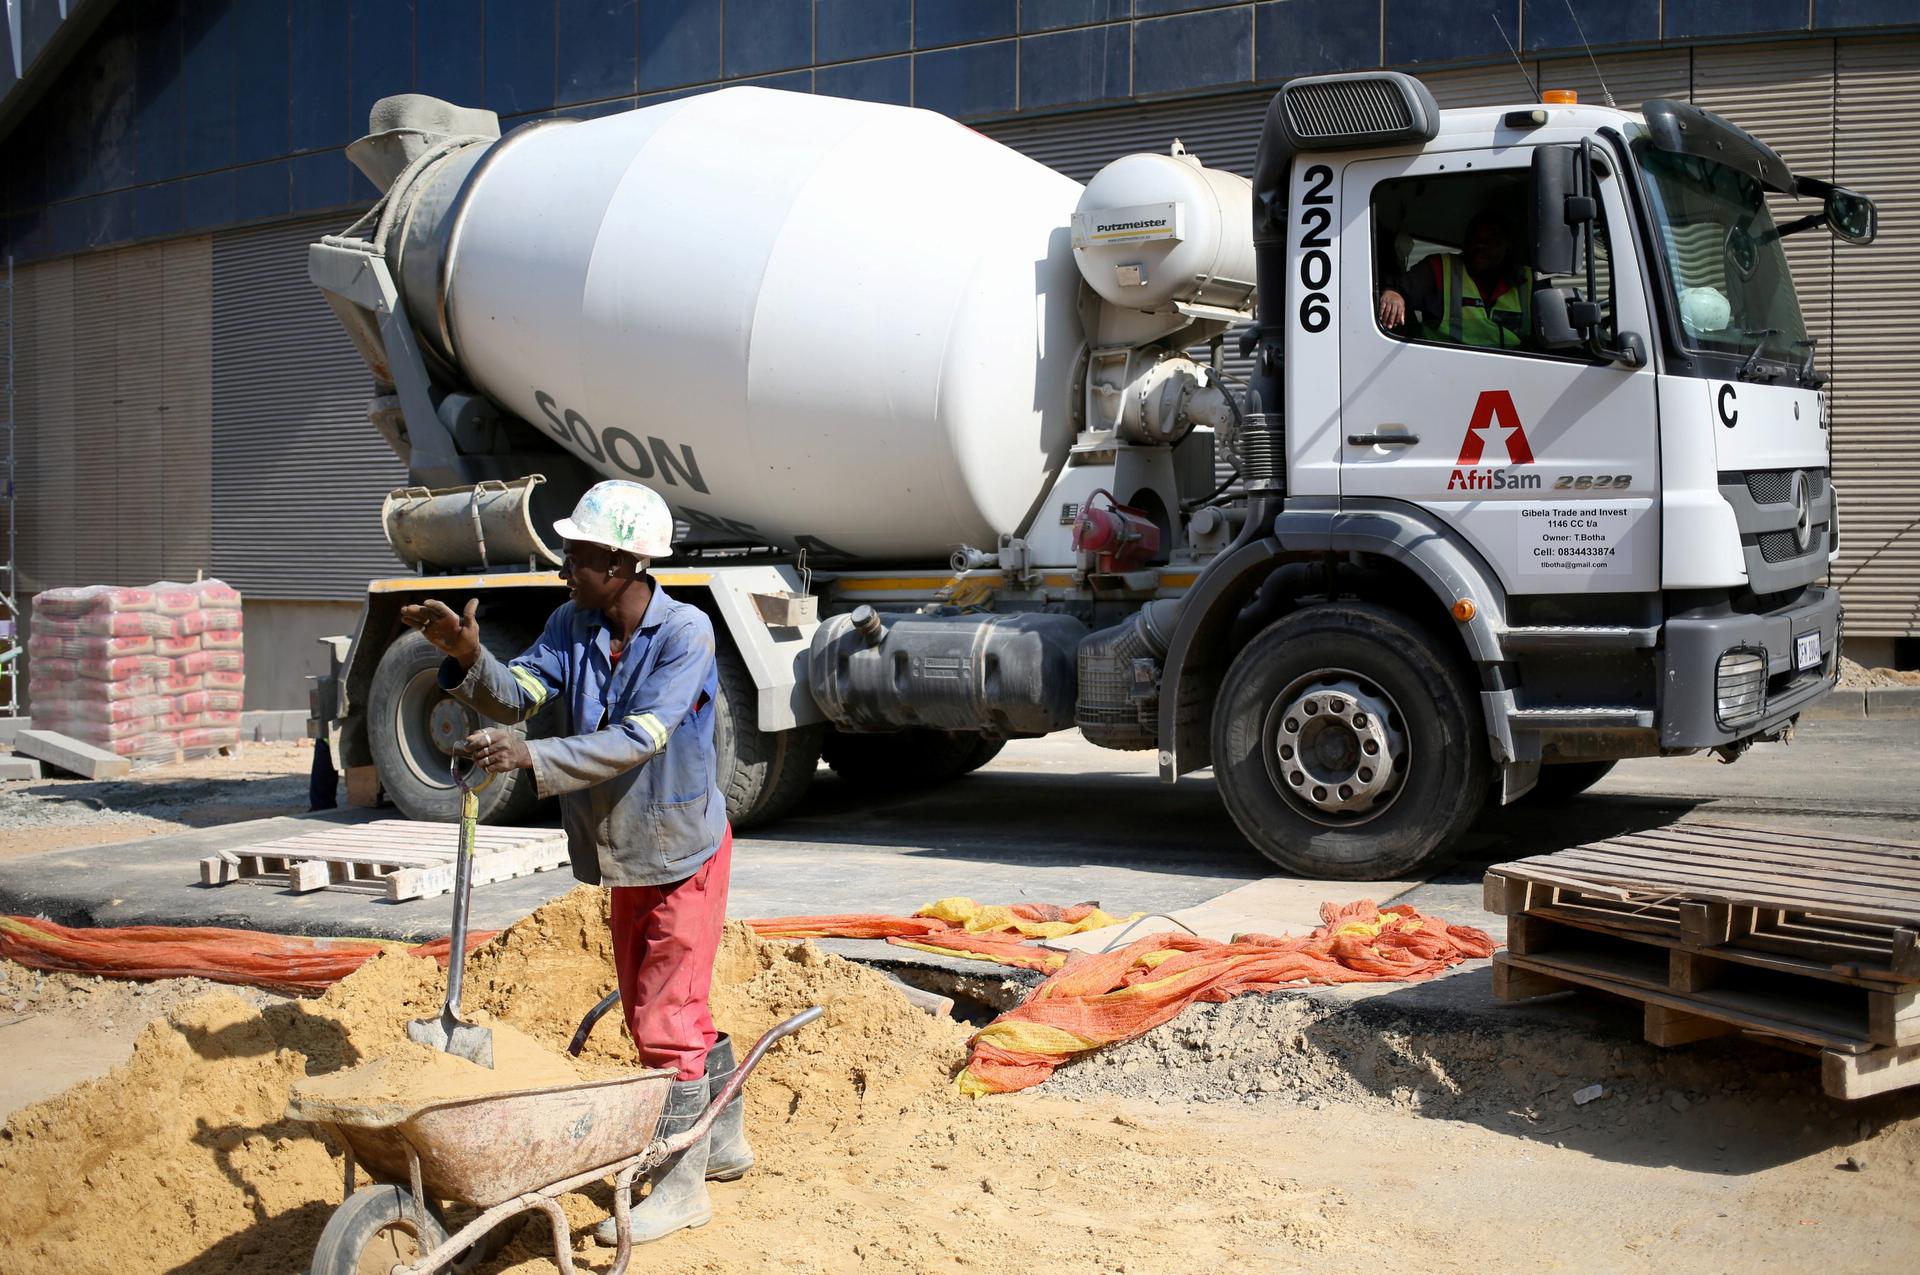 Worker in front of cement truck